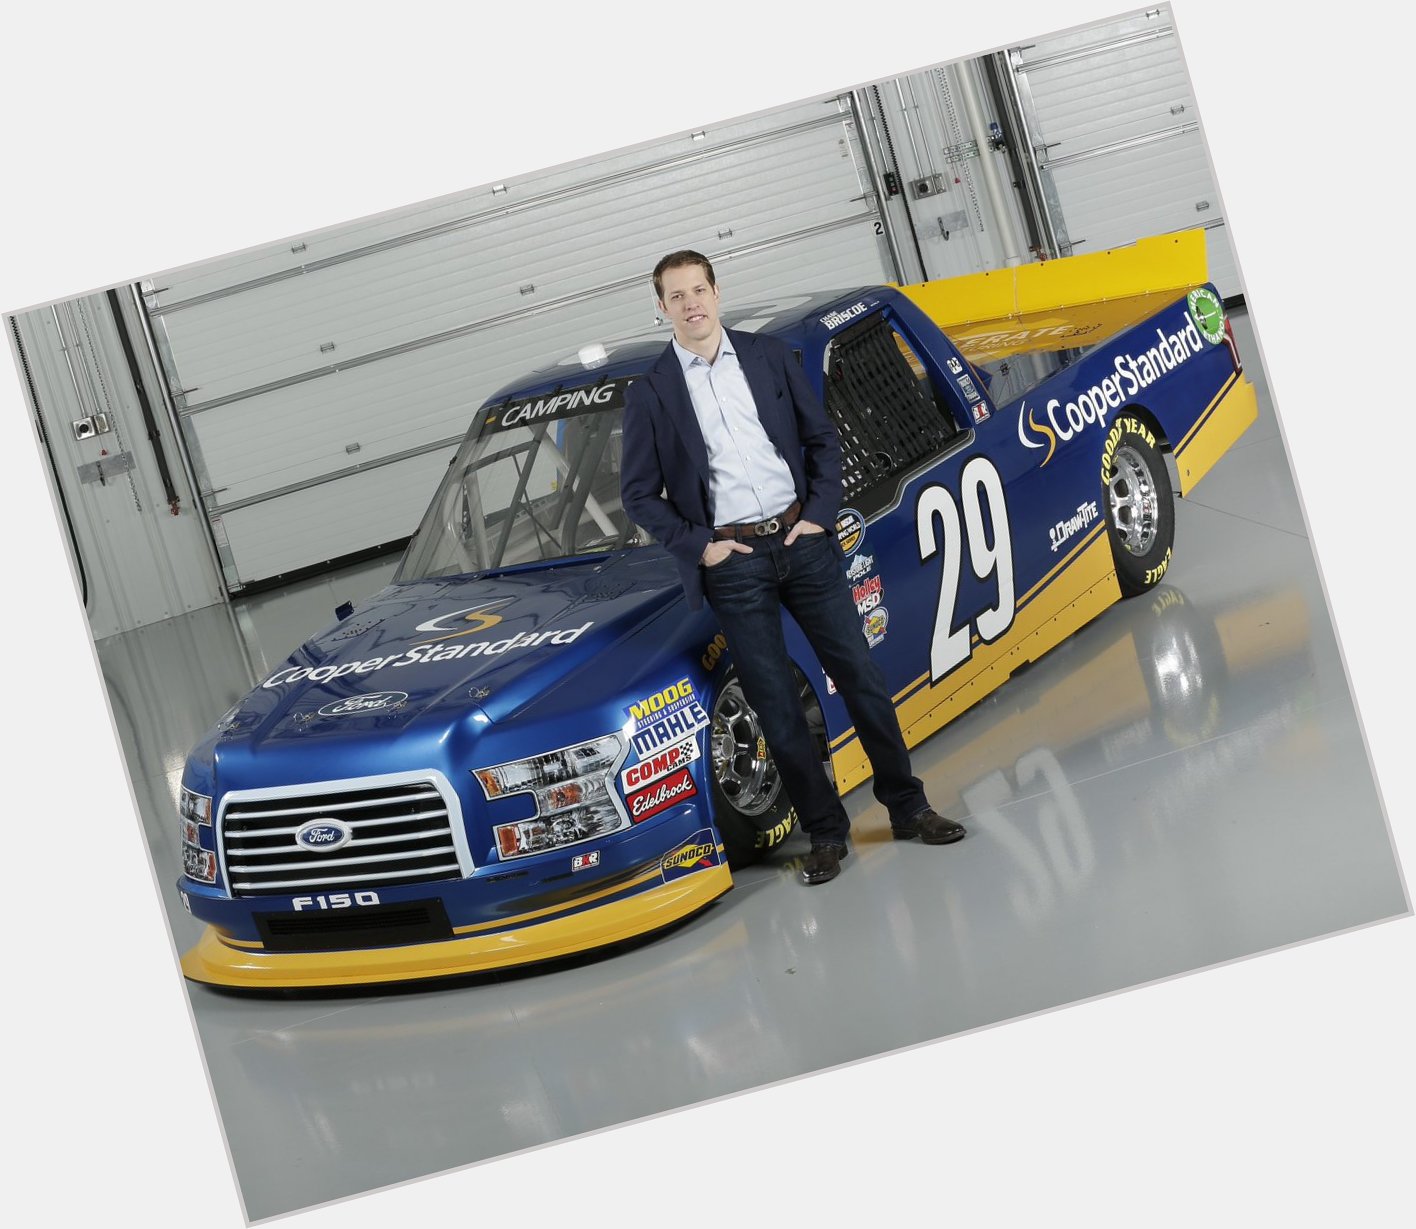 Joins us in wishing a very HAPPY BIRTHDAY to our team owner, Brad Keselowski!   